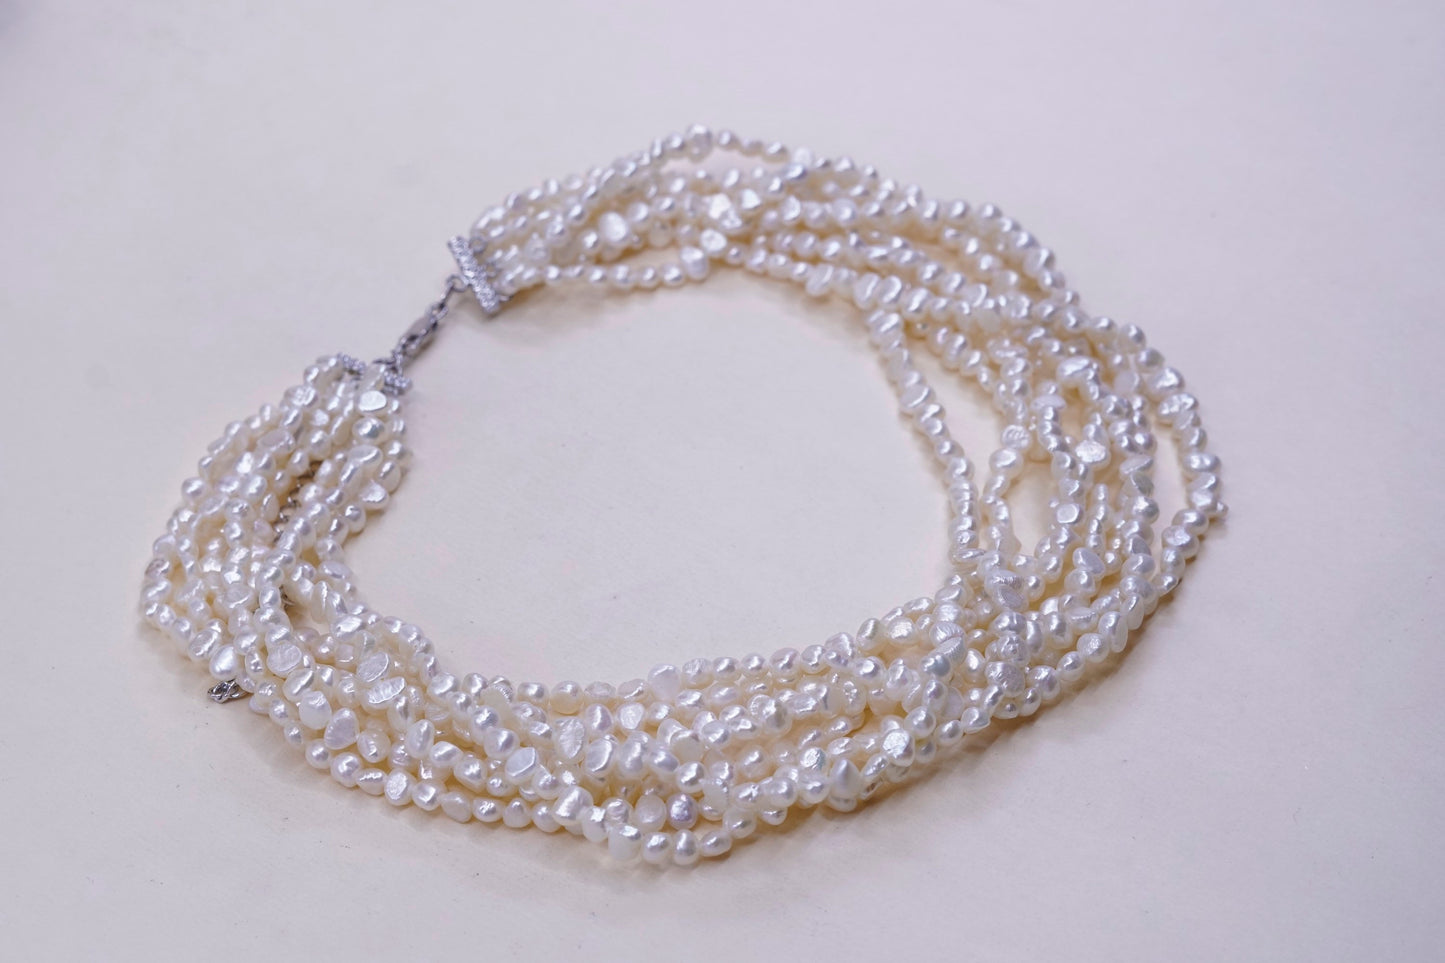 14+4”, RG multi 8 strands handmade pearl chain necklace w/ sterling 925 silver